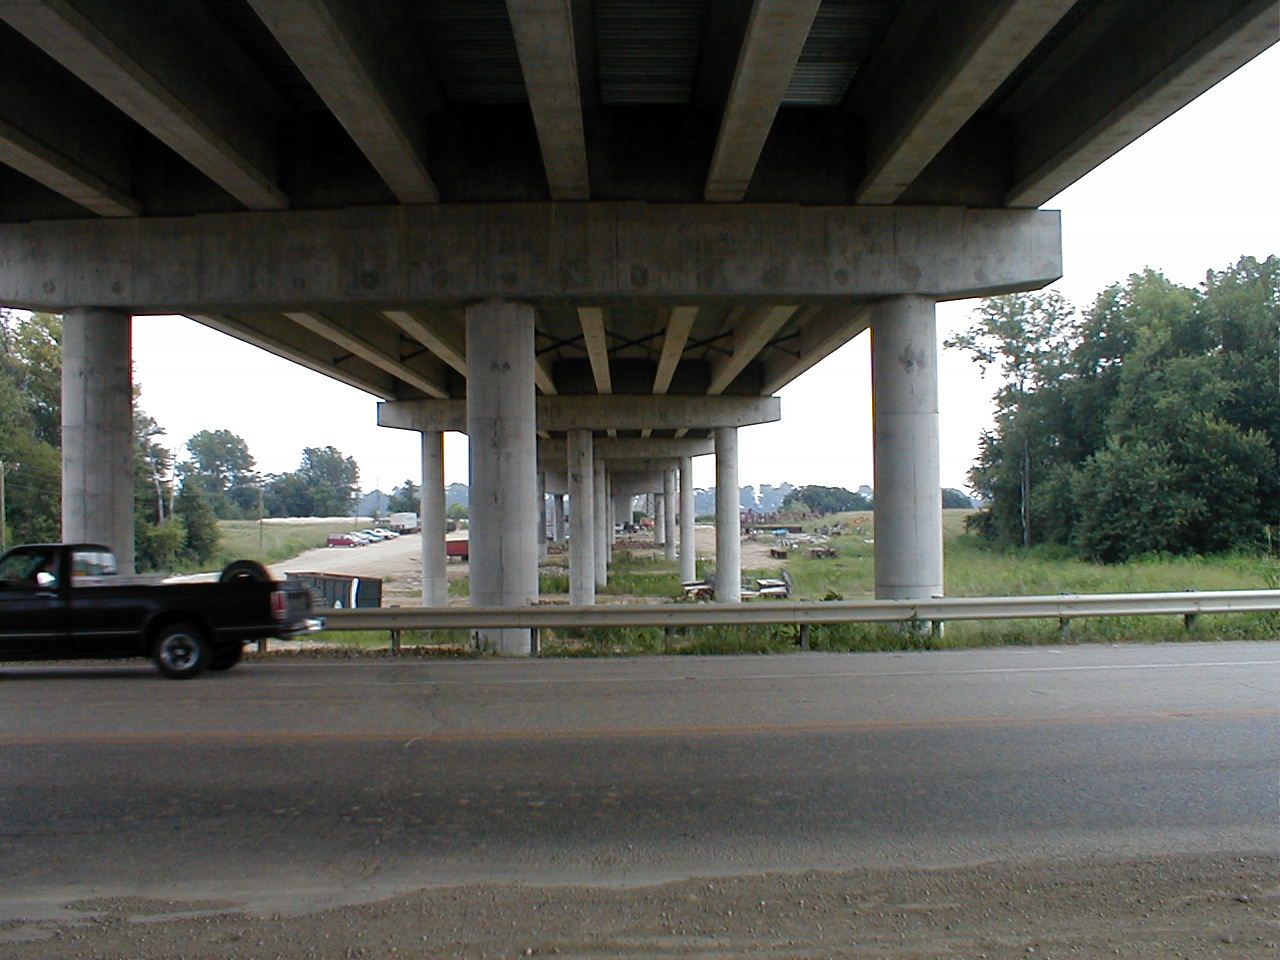 Taken near the IN 66/US 231 intersection. This is underneath the new bridge.